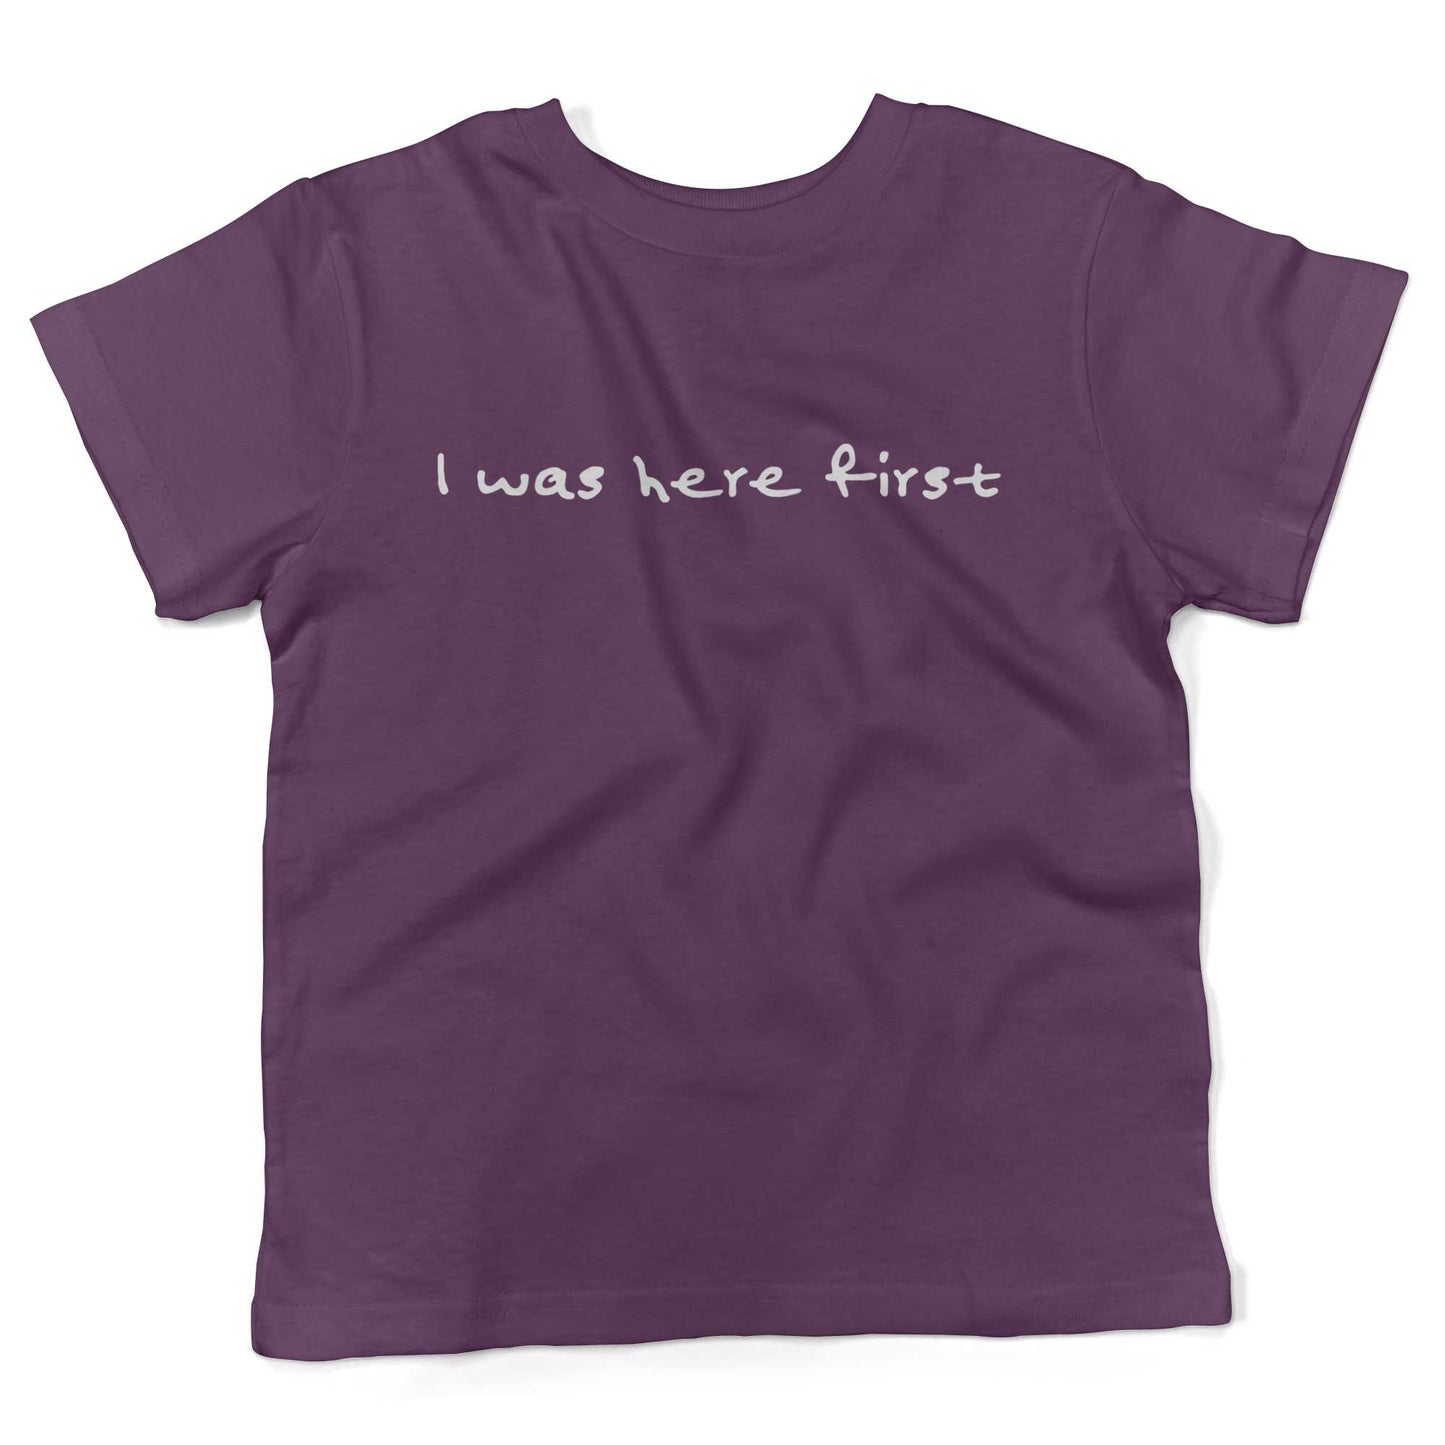 I Was Here First Toddler Shirt-Organic Purple-2T